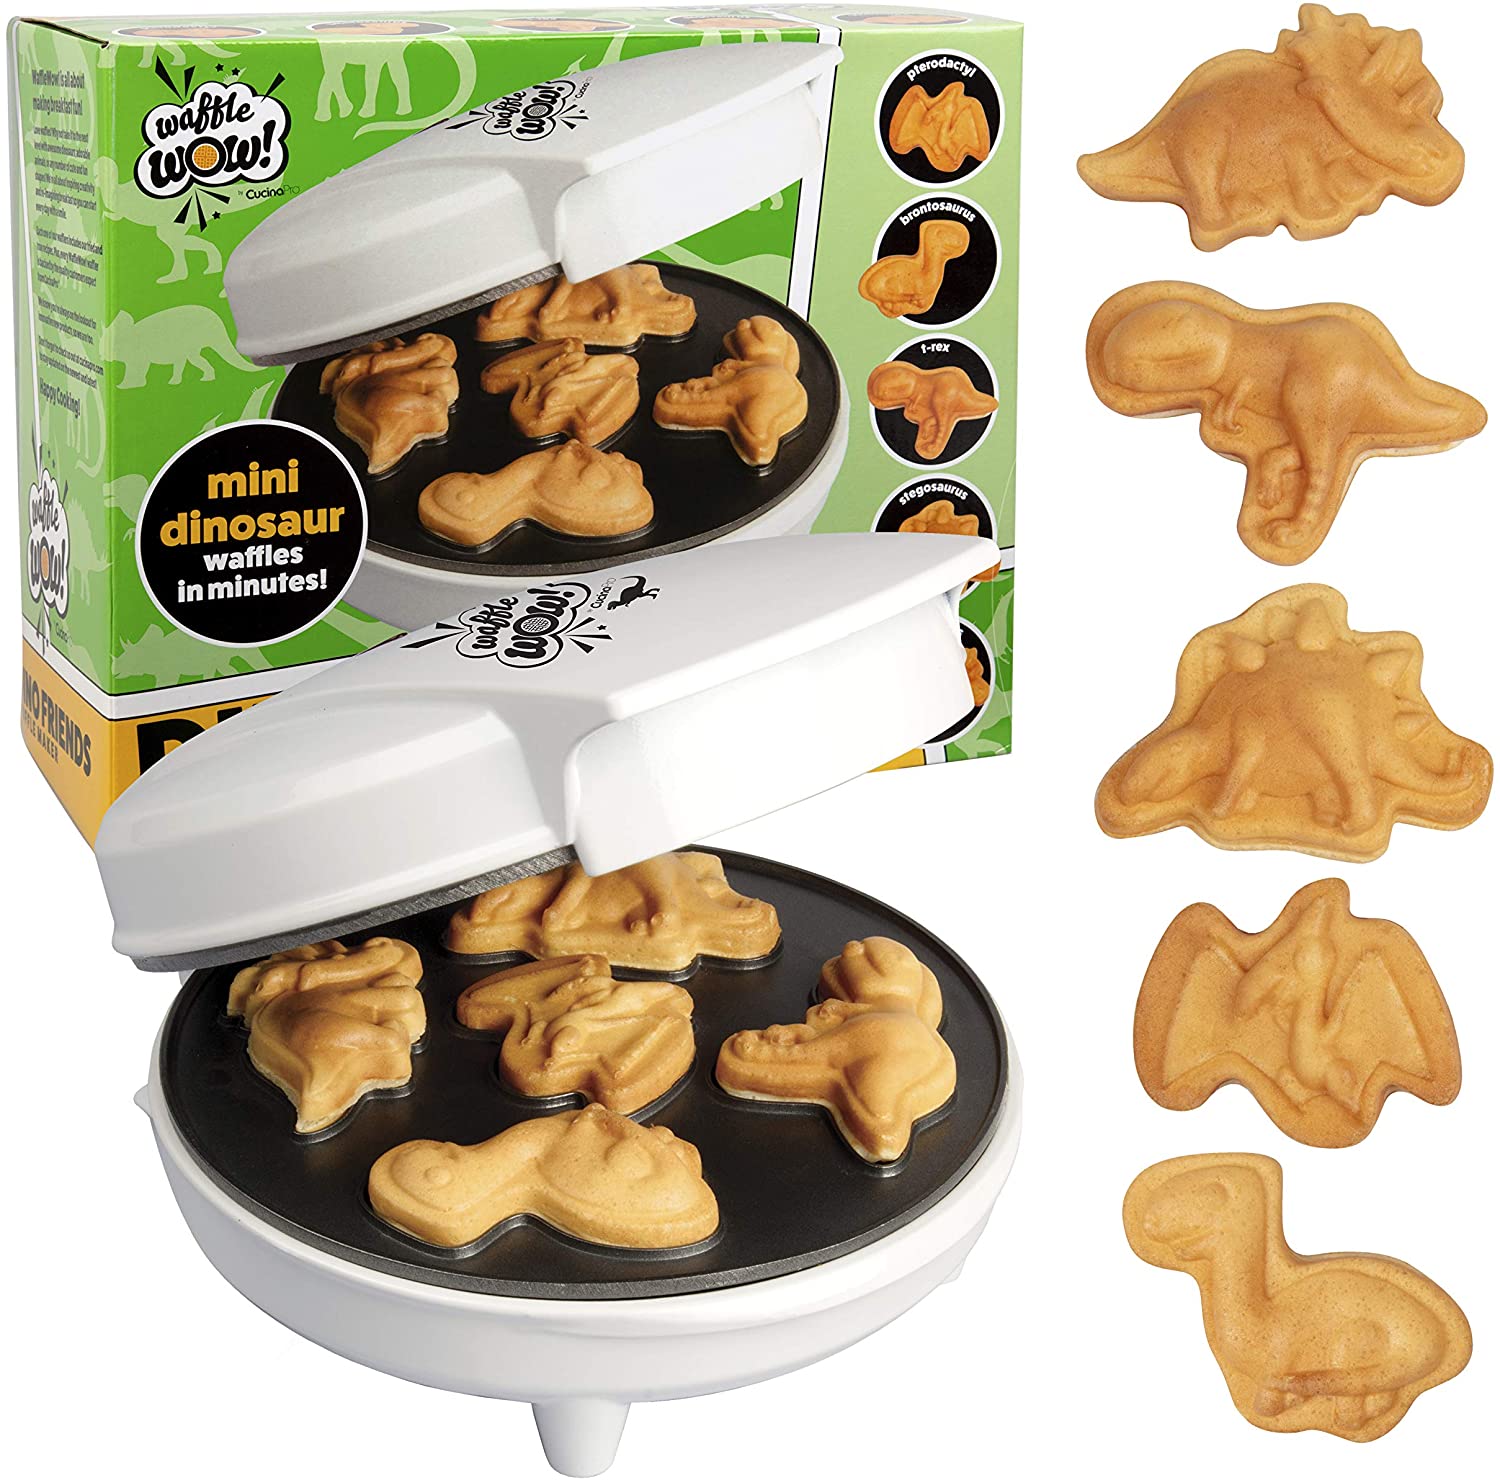 Animal Mini Waffle Maker- Makes 7 Fun, Different Shaped Pancakes - Electric